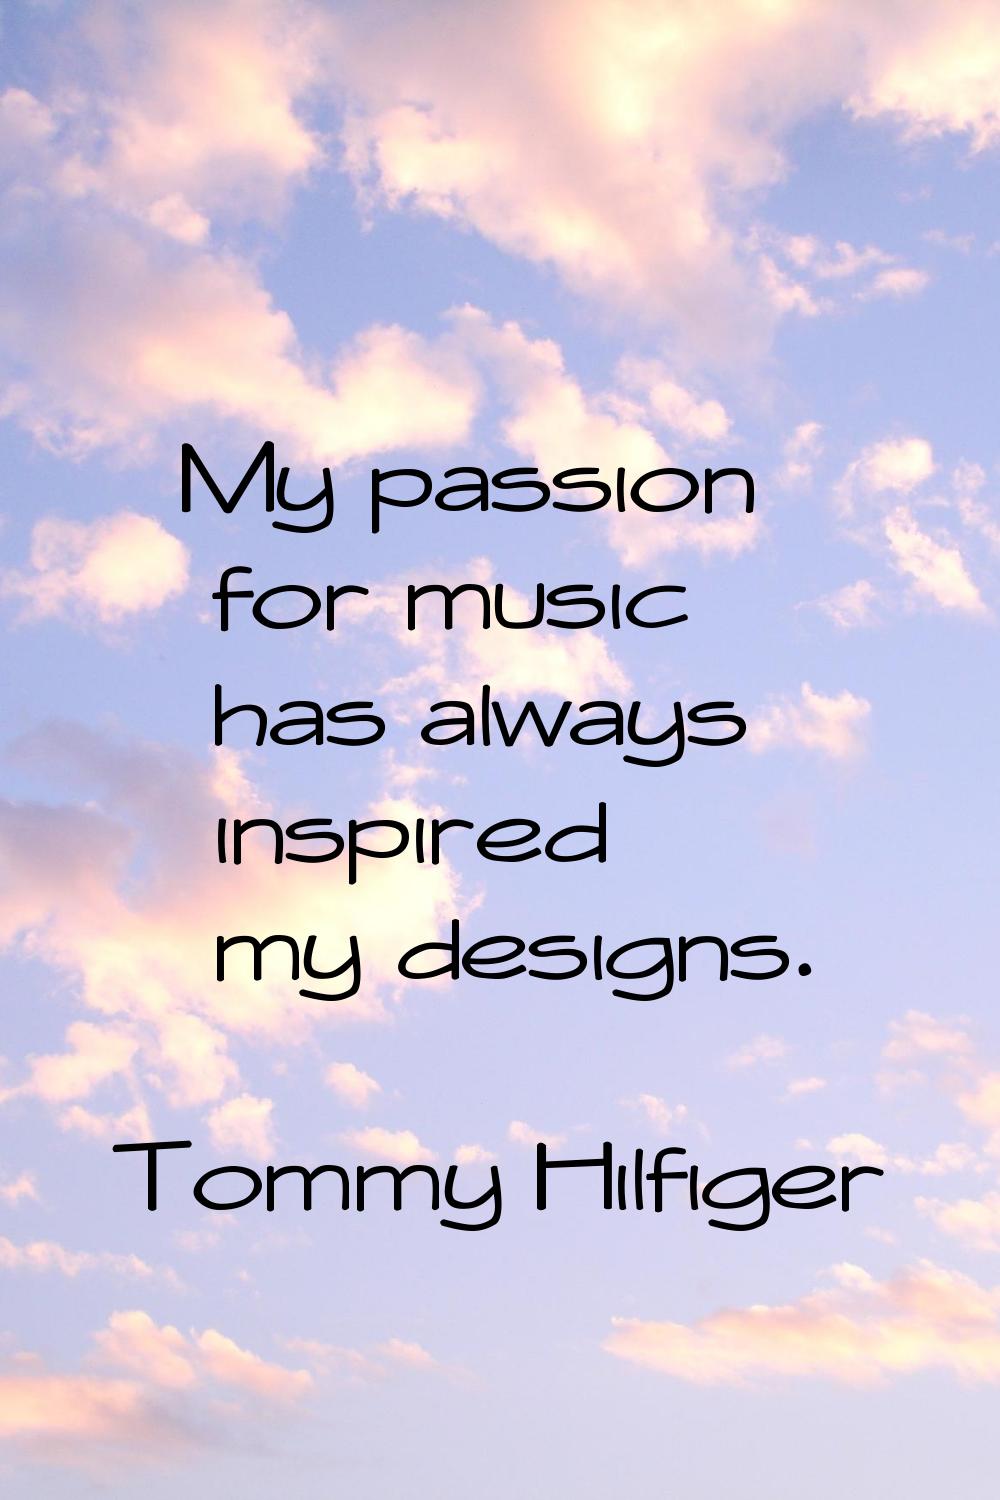 My passion for music has always inspired my designs.